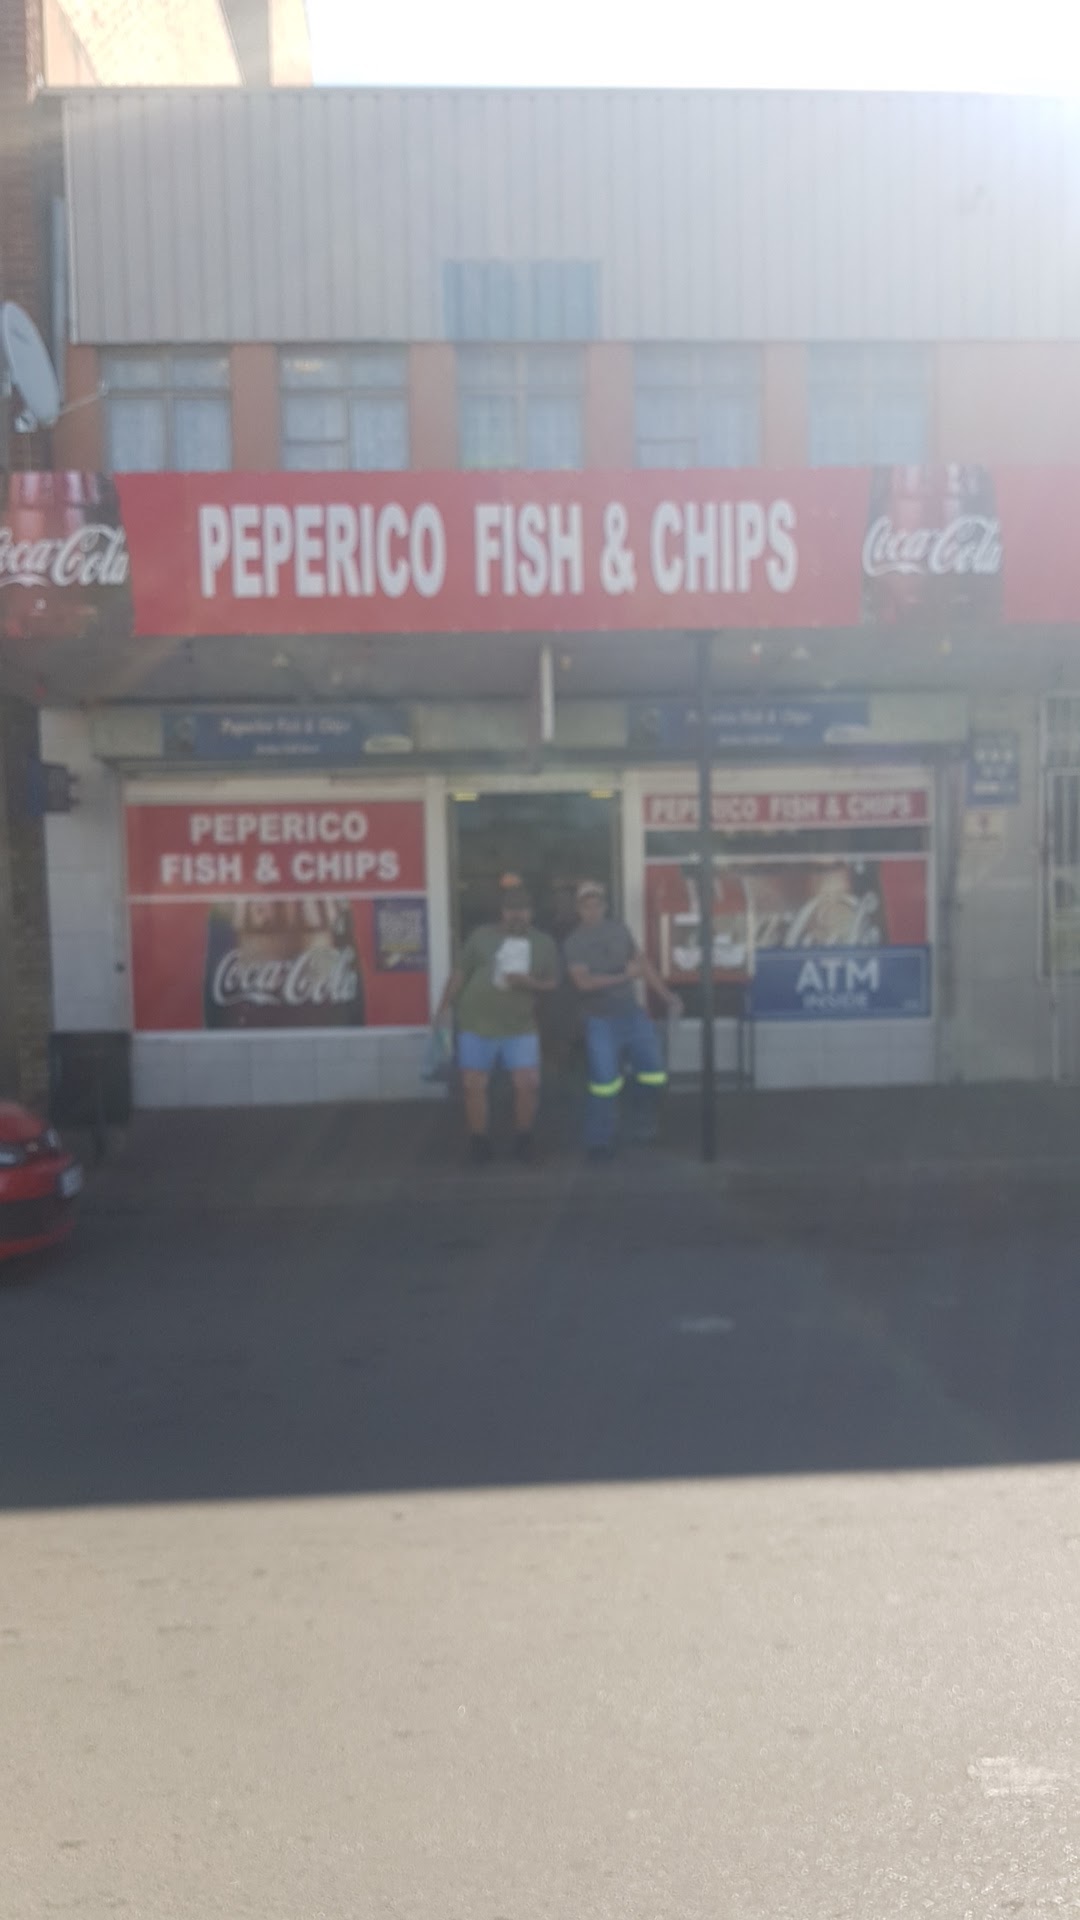 Pepericos Fish & Chips